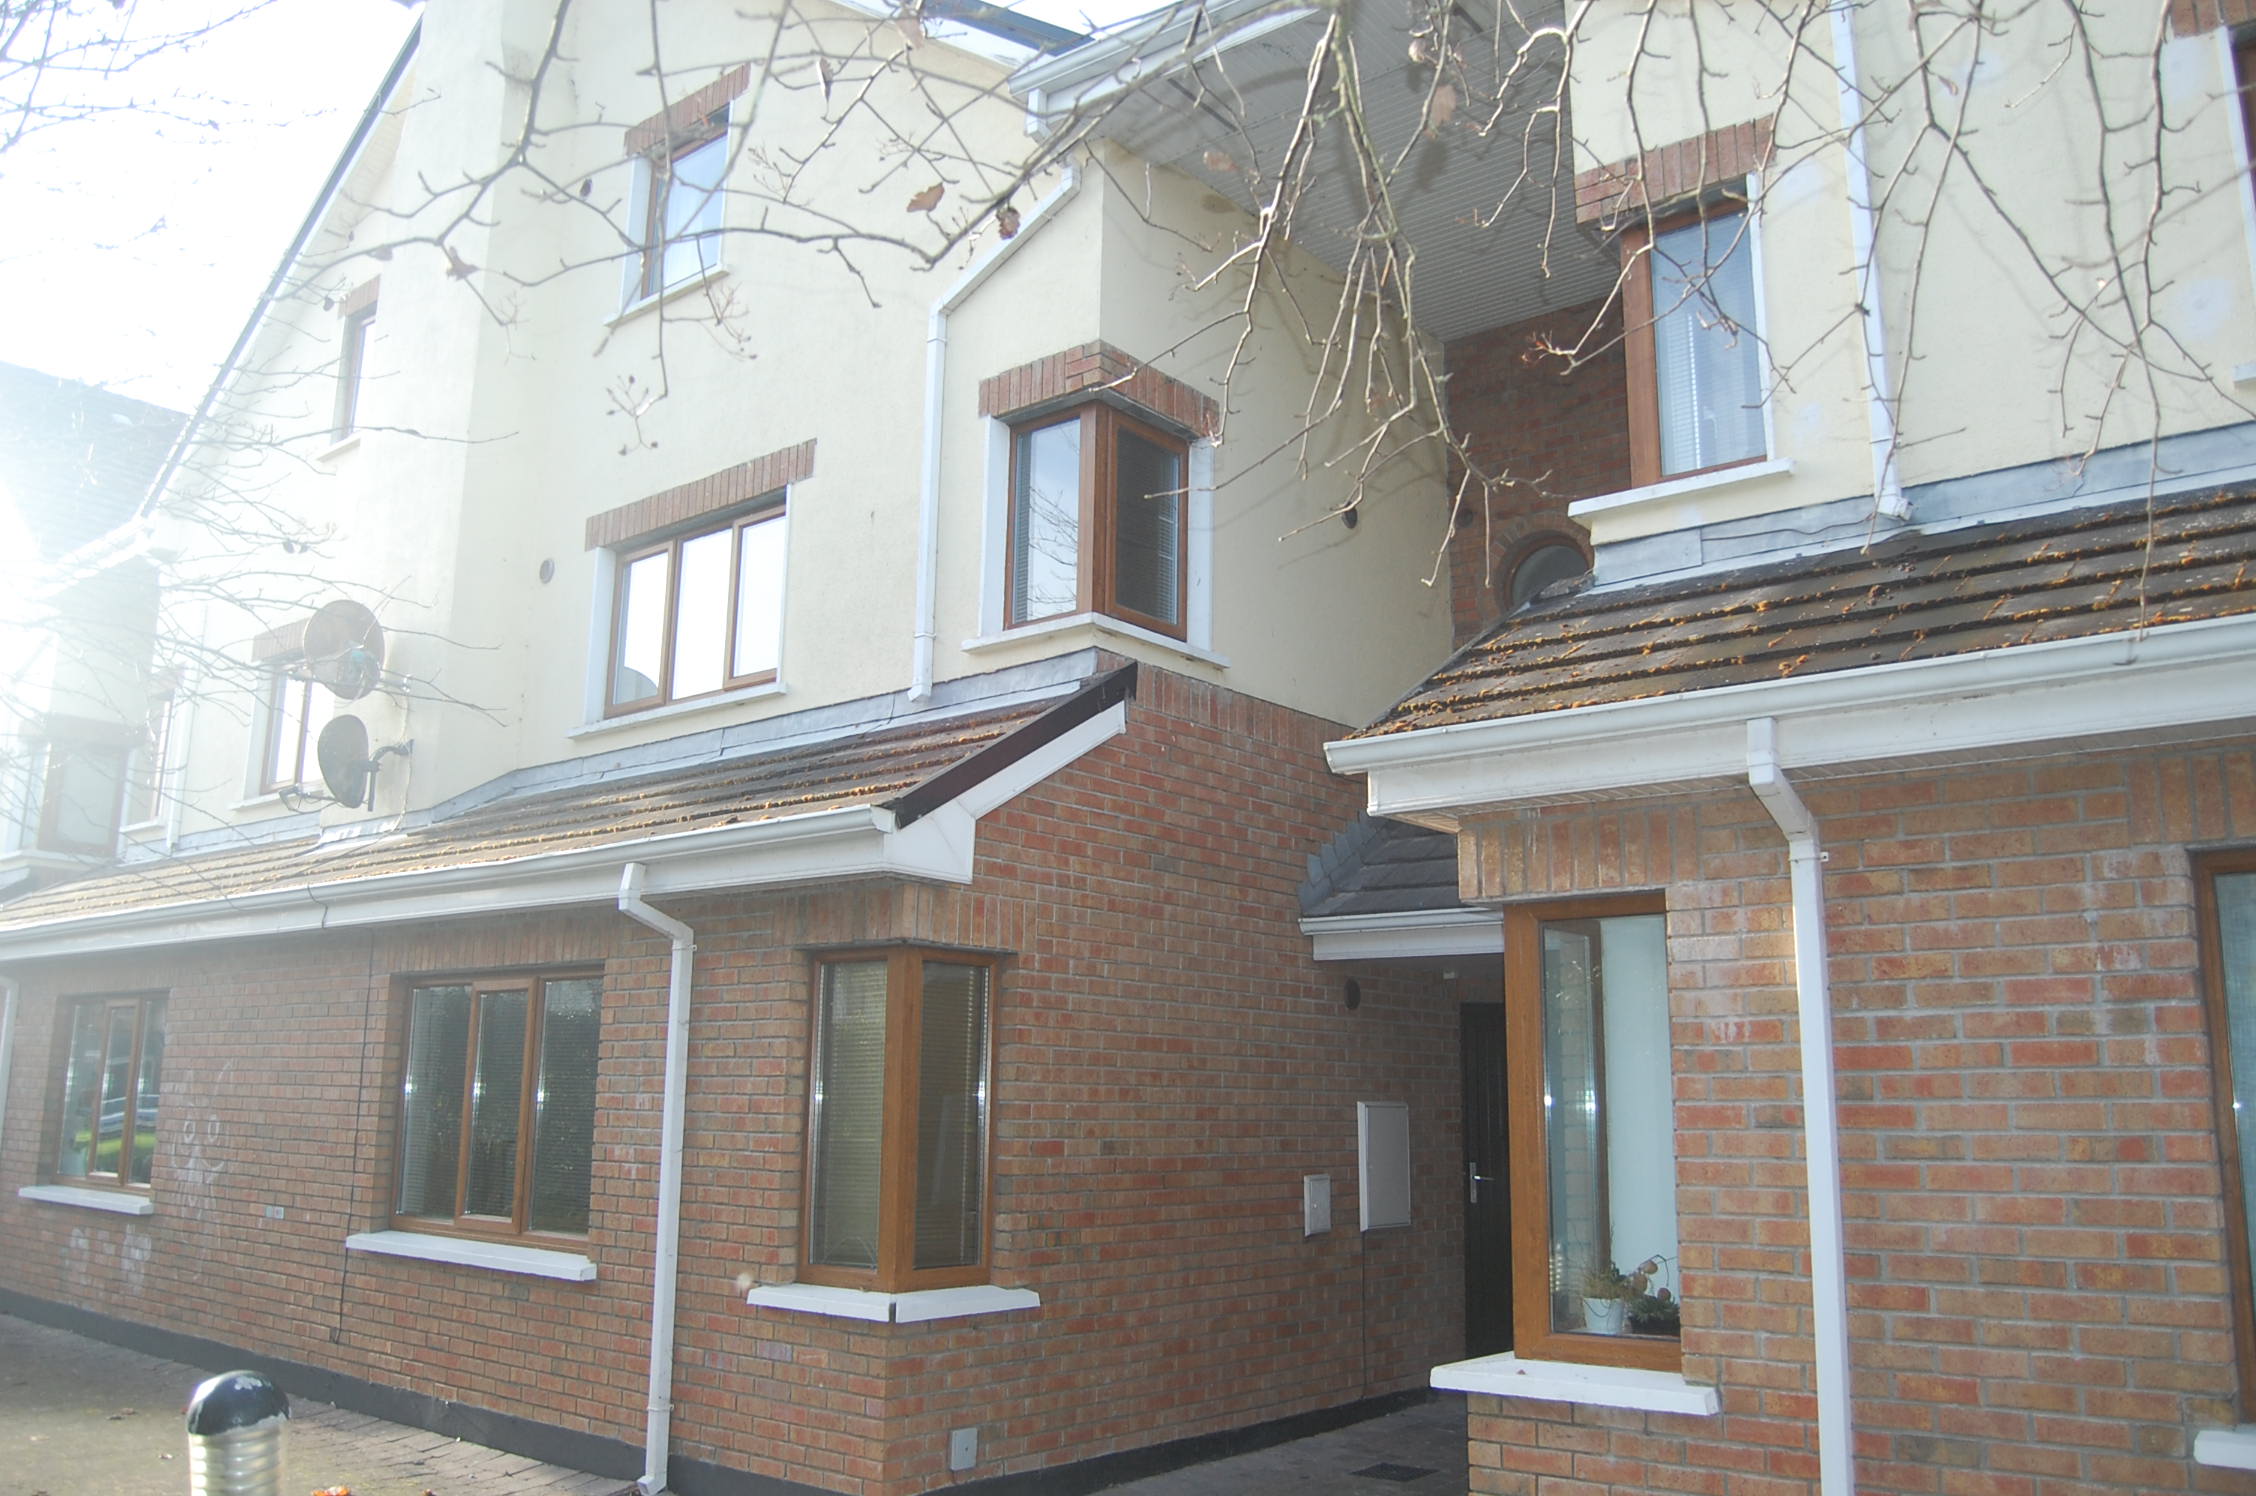 76 Riverdale, Oranmore, Co. Galway